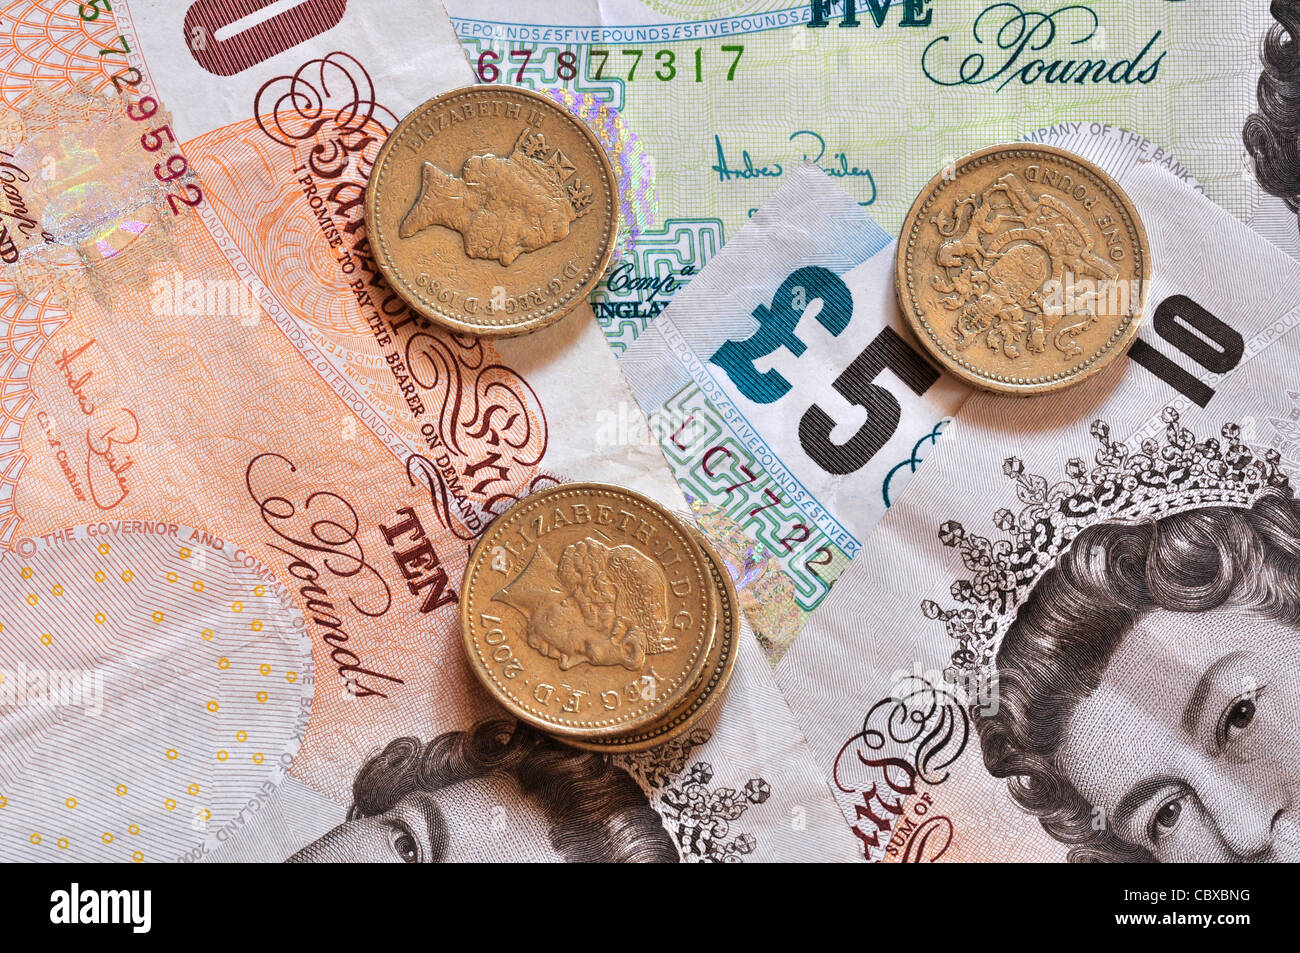 British currency - notes and coins UK Stock Photo